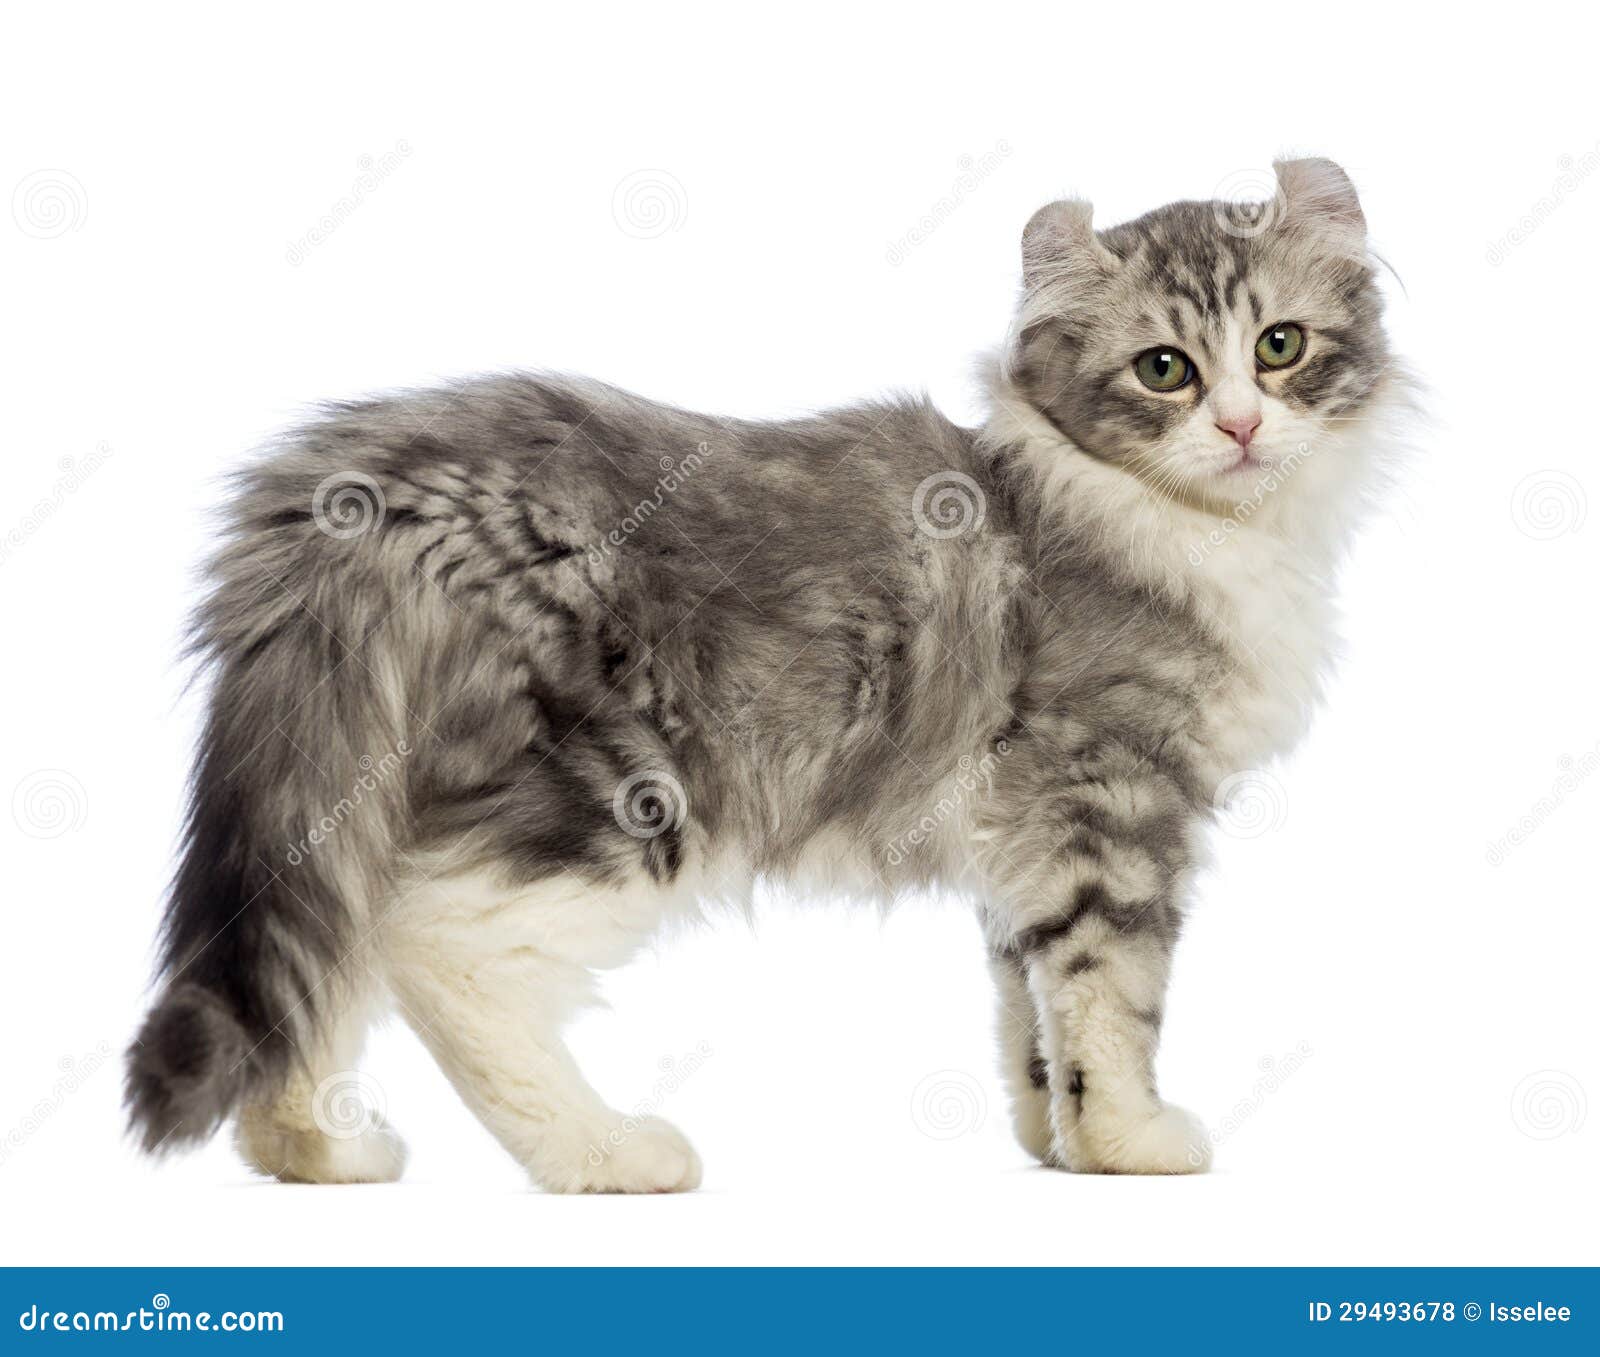 side view of an american curl kitten, 3 months old, looking at the camera